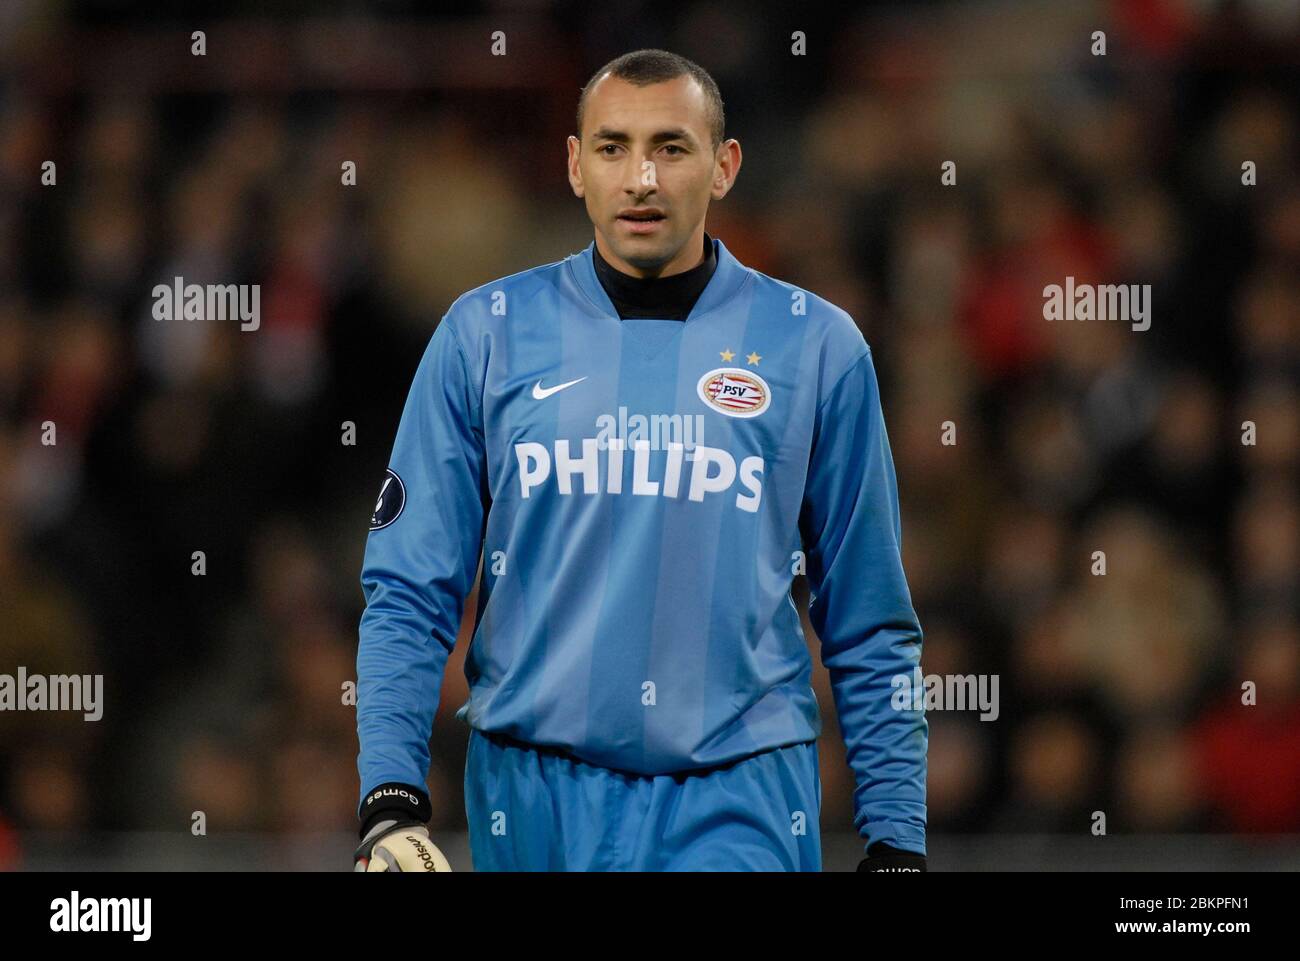 EINDHOVEN, NEDERLAND. MARCH 12: Heurelho Gomes of PSV Eindhoven During UEFA Cup Round of 16 Second Leg between PSV Eindhoven and Tottenham Hotspur at Stock Photo